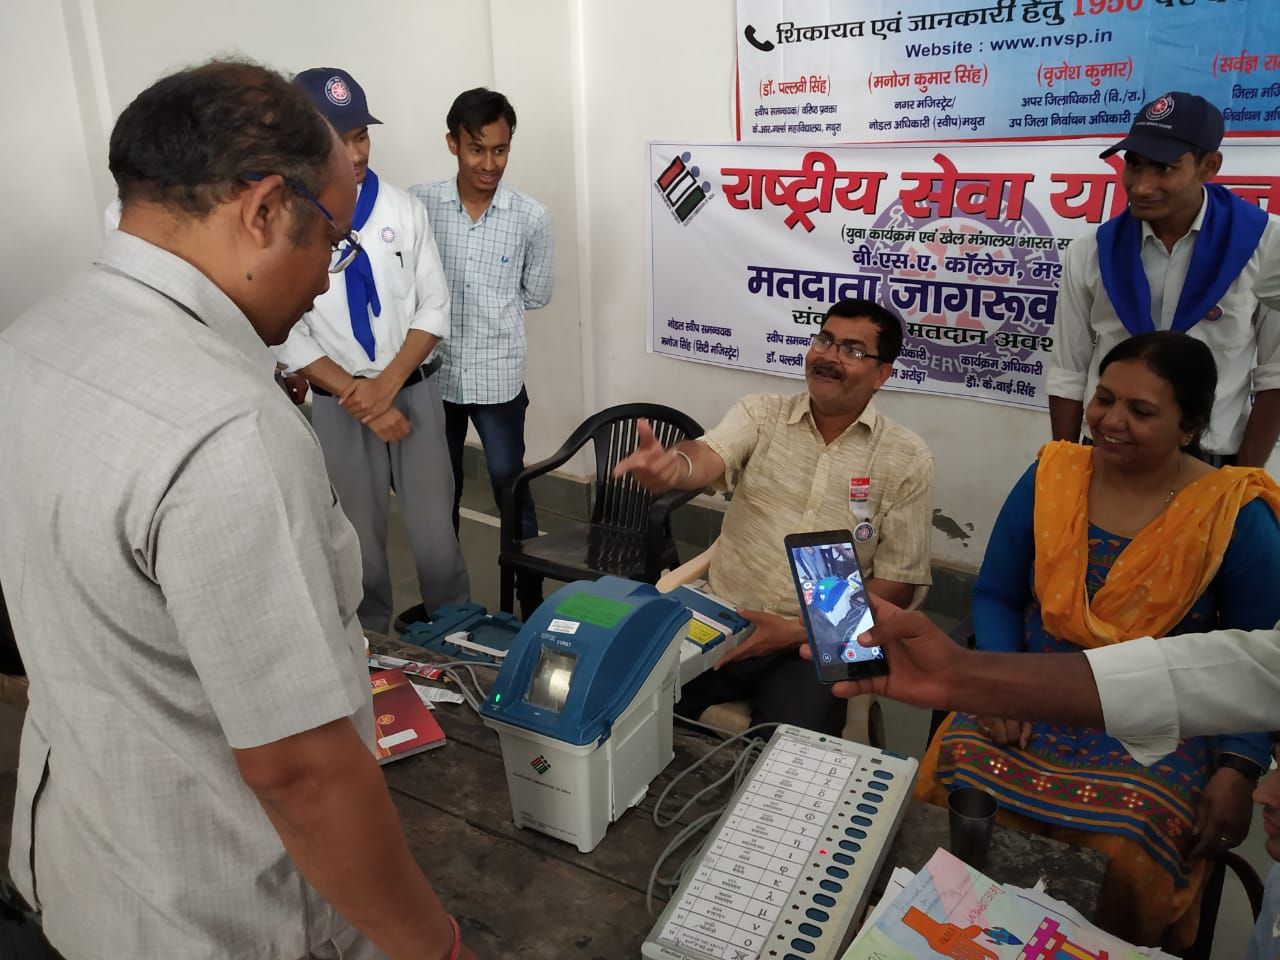 EVM &VVPAT training and appeal of ethical voting